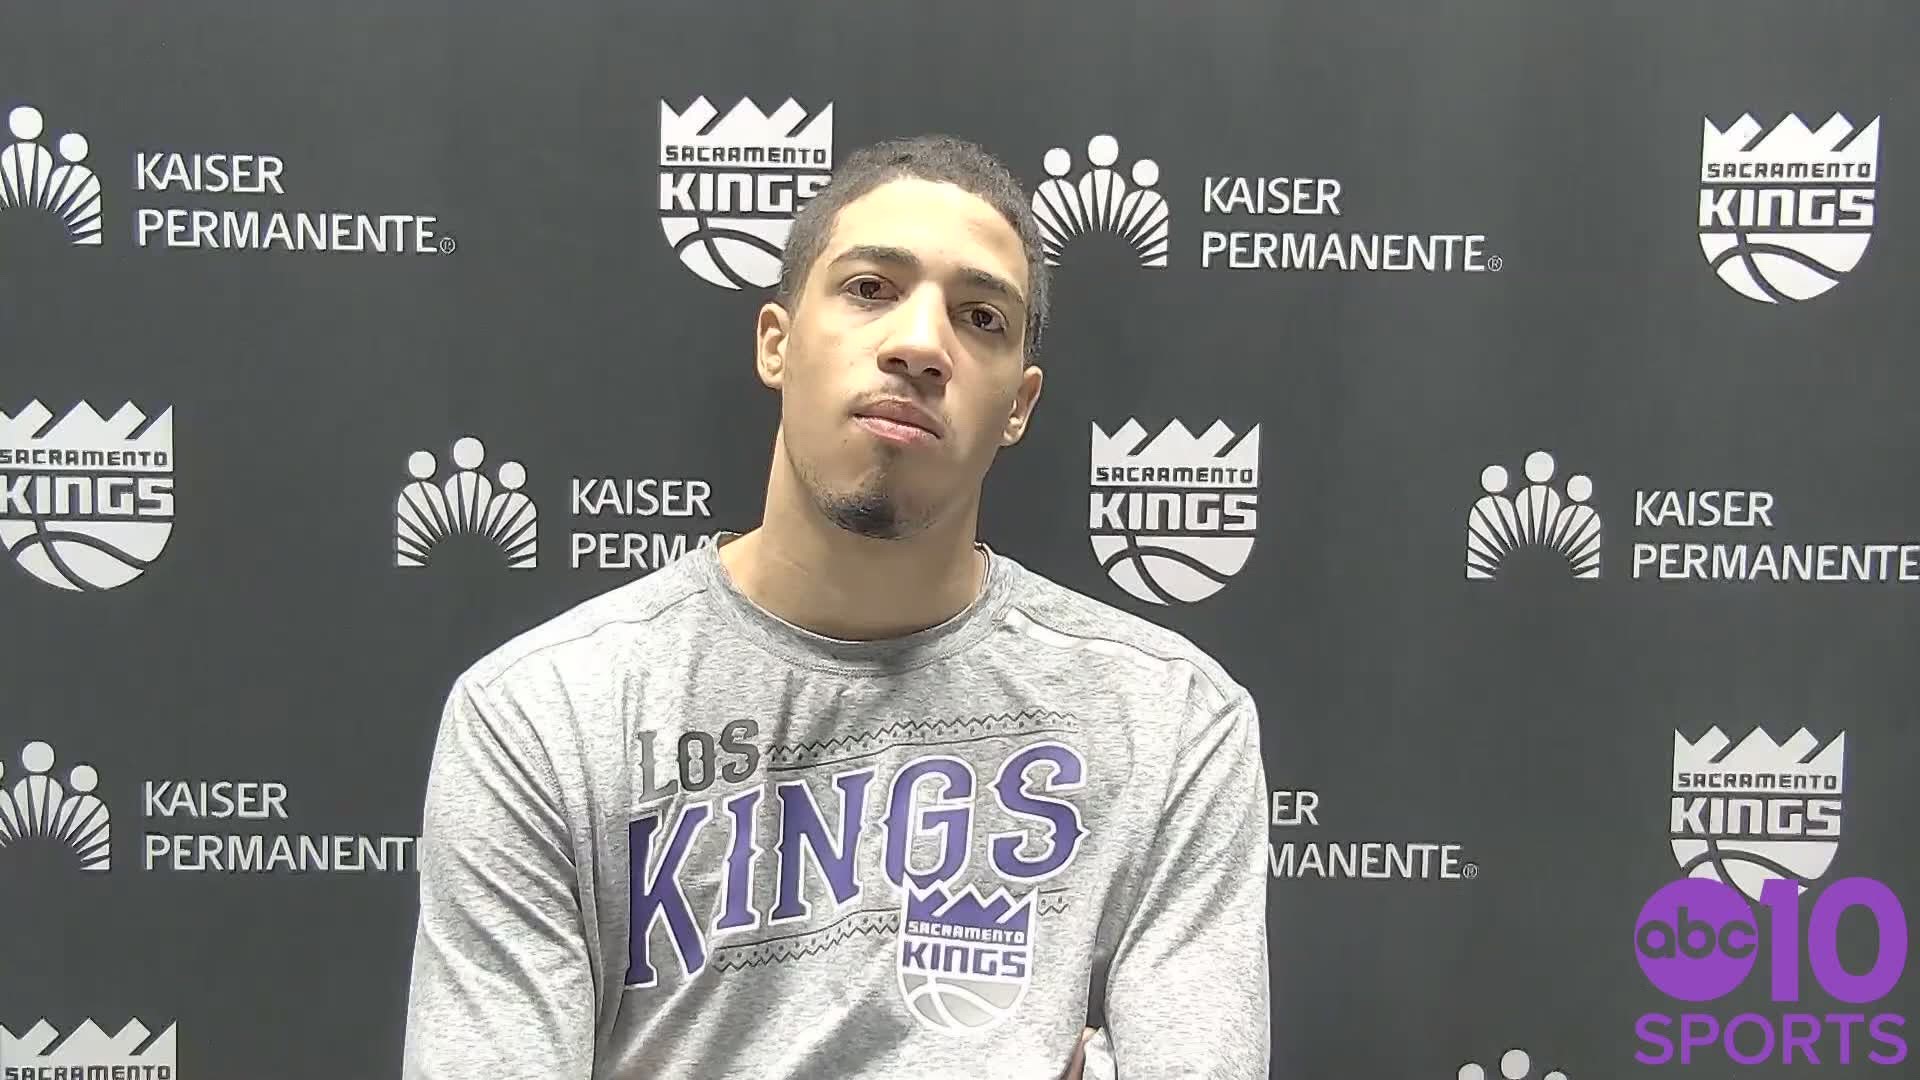 Following Saturday's 129-105 loss in Philadelphia to the 76ers, Kings rookie guard Tyrese Haliburton says Sacramento must play faster and play better.